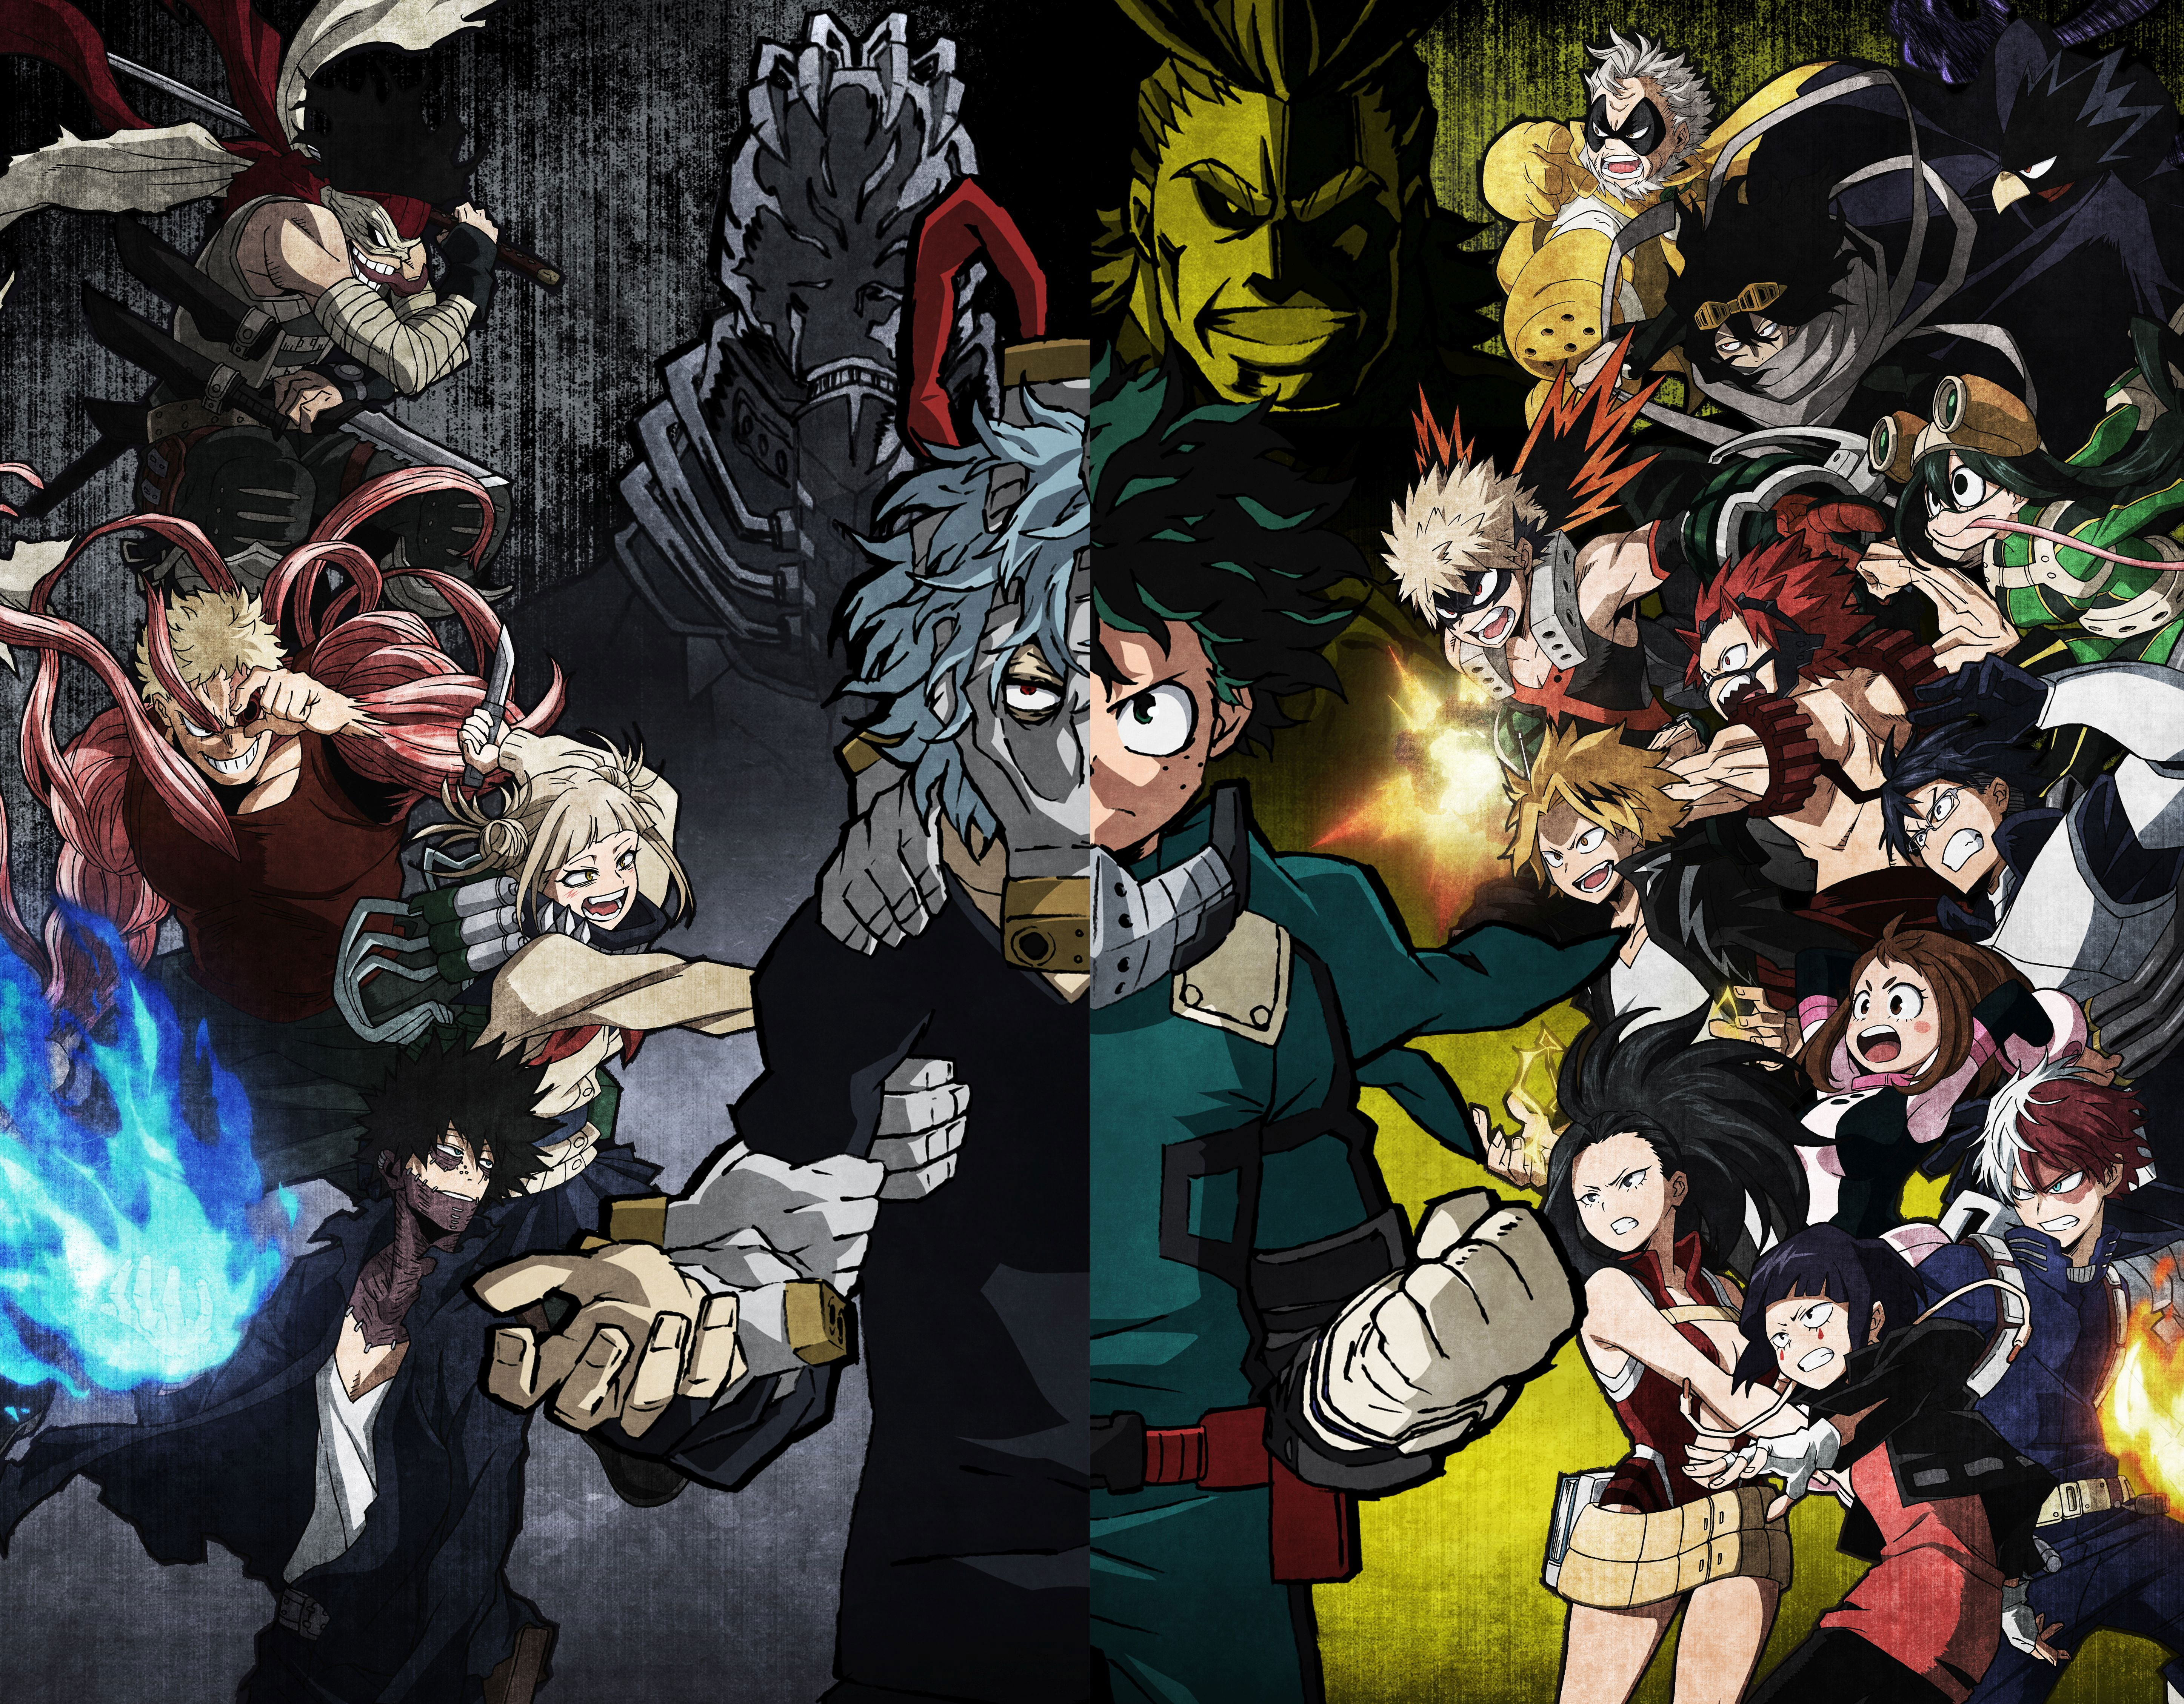 Wallpaper Anime, My Hero Academia, All For One Boku No Hero, All For One Boku No Hero, Anime